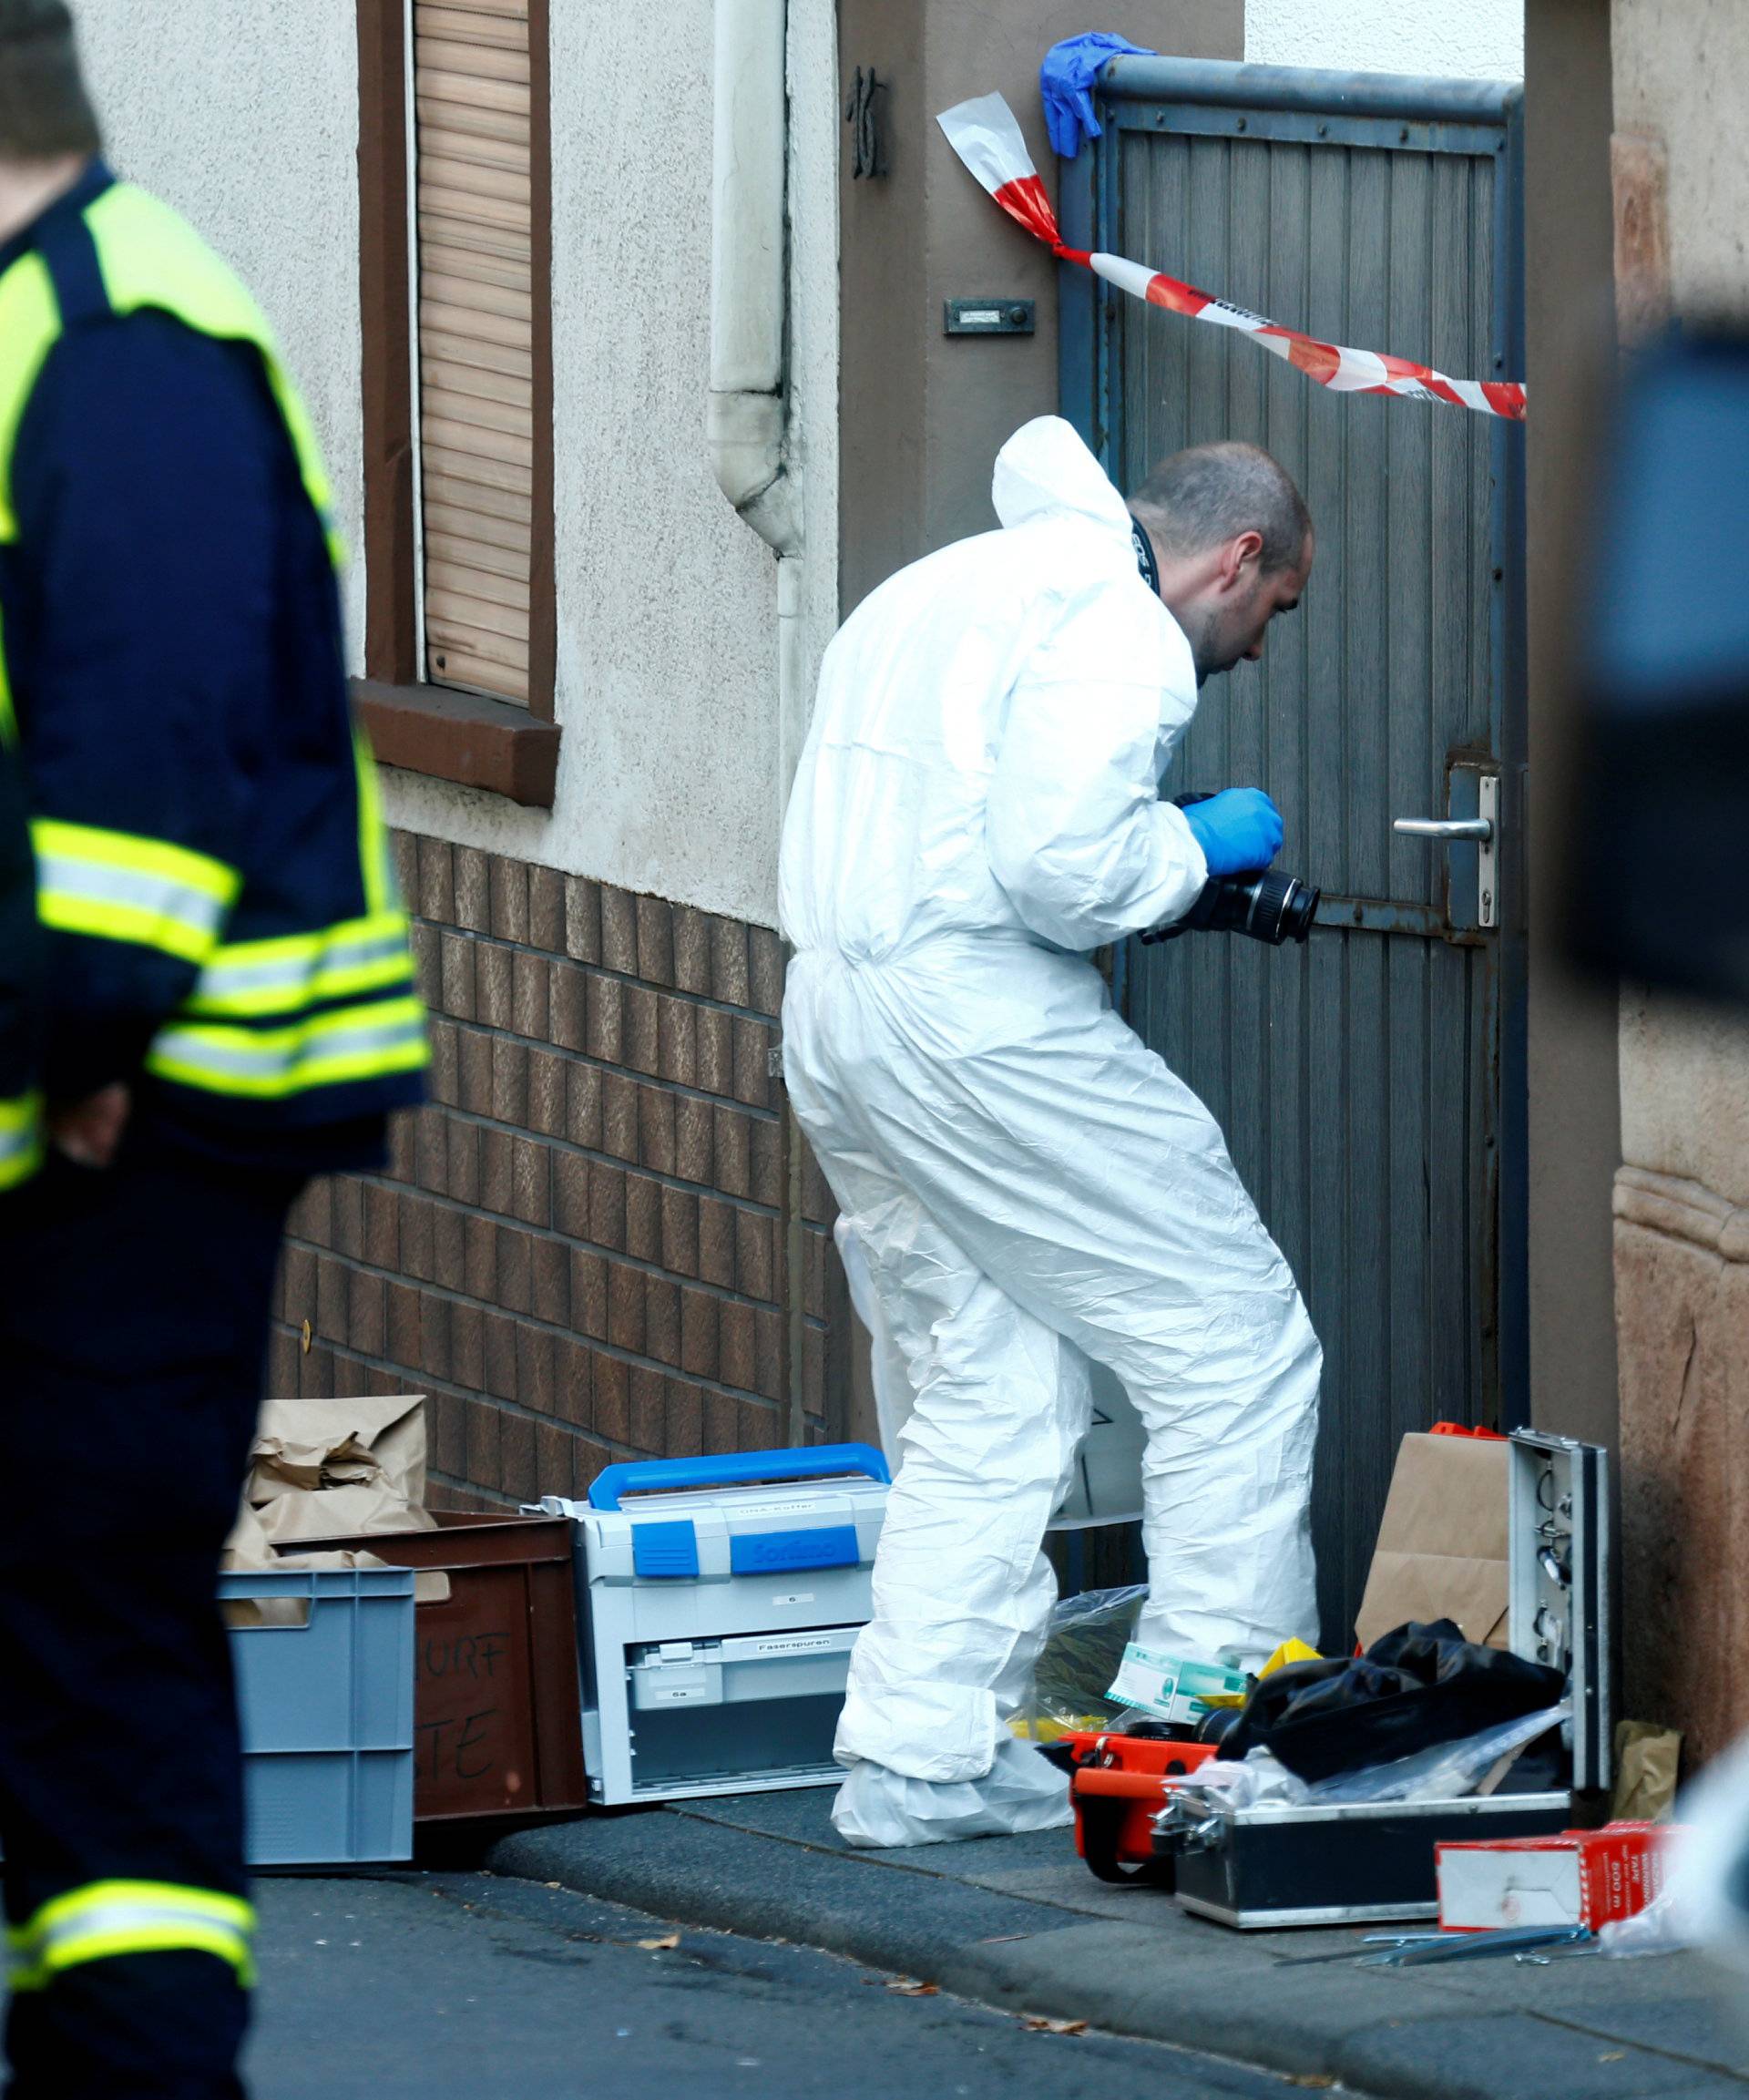 A forensic expert works at a crime scene where two people died during a police operation in Kirchheim